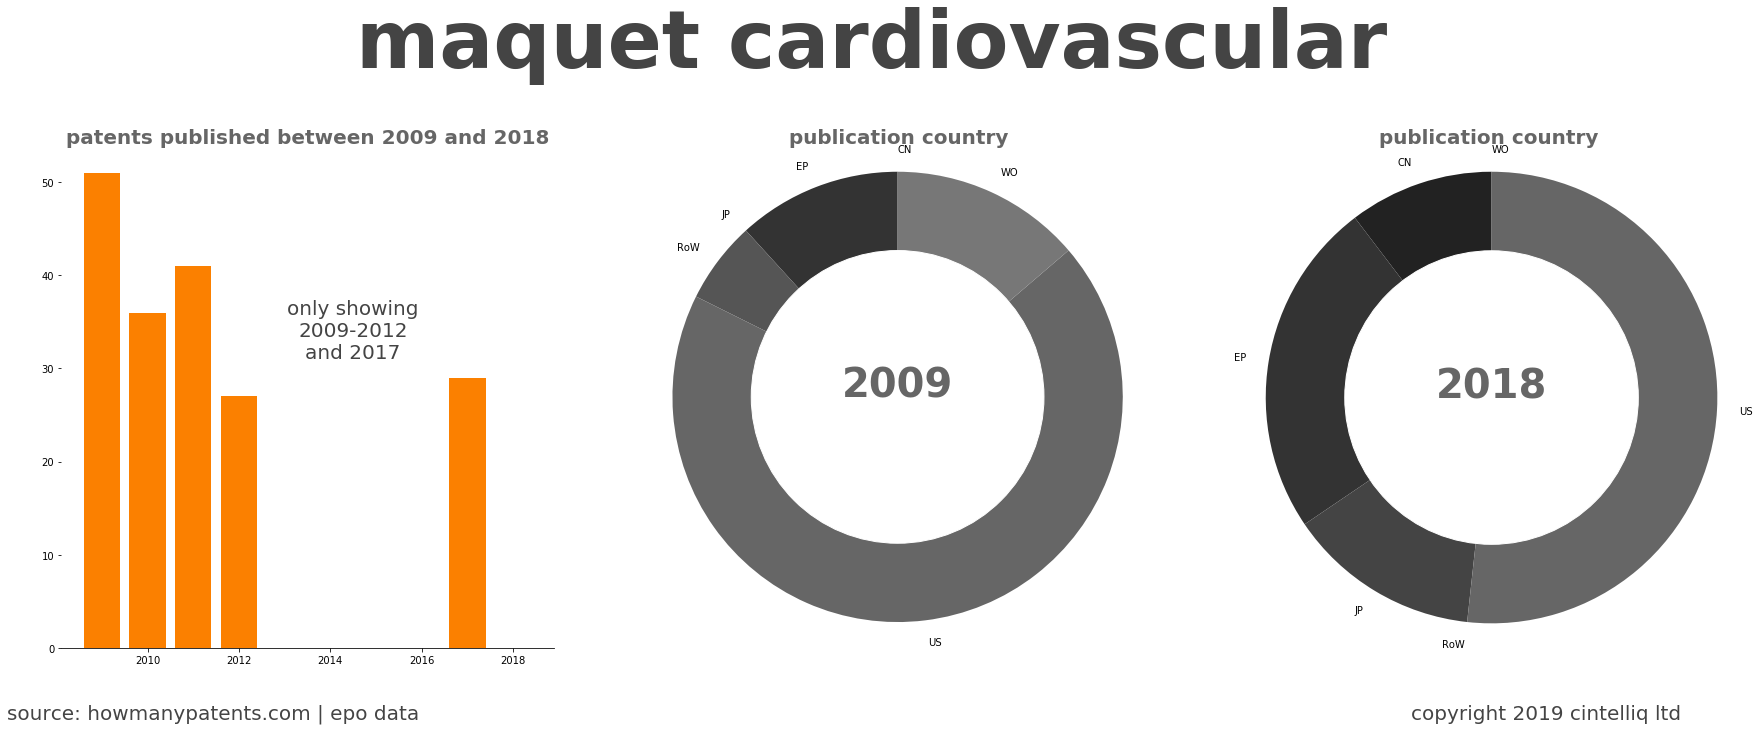 summary of patents for Maquet Cardiovascular